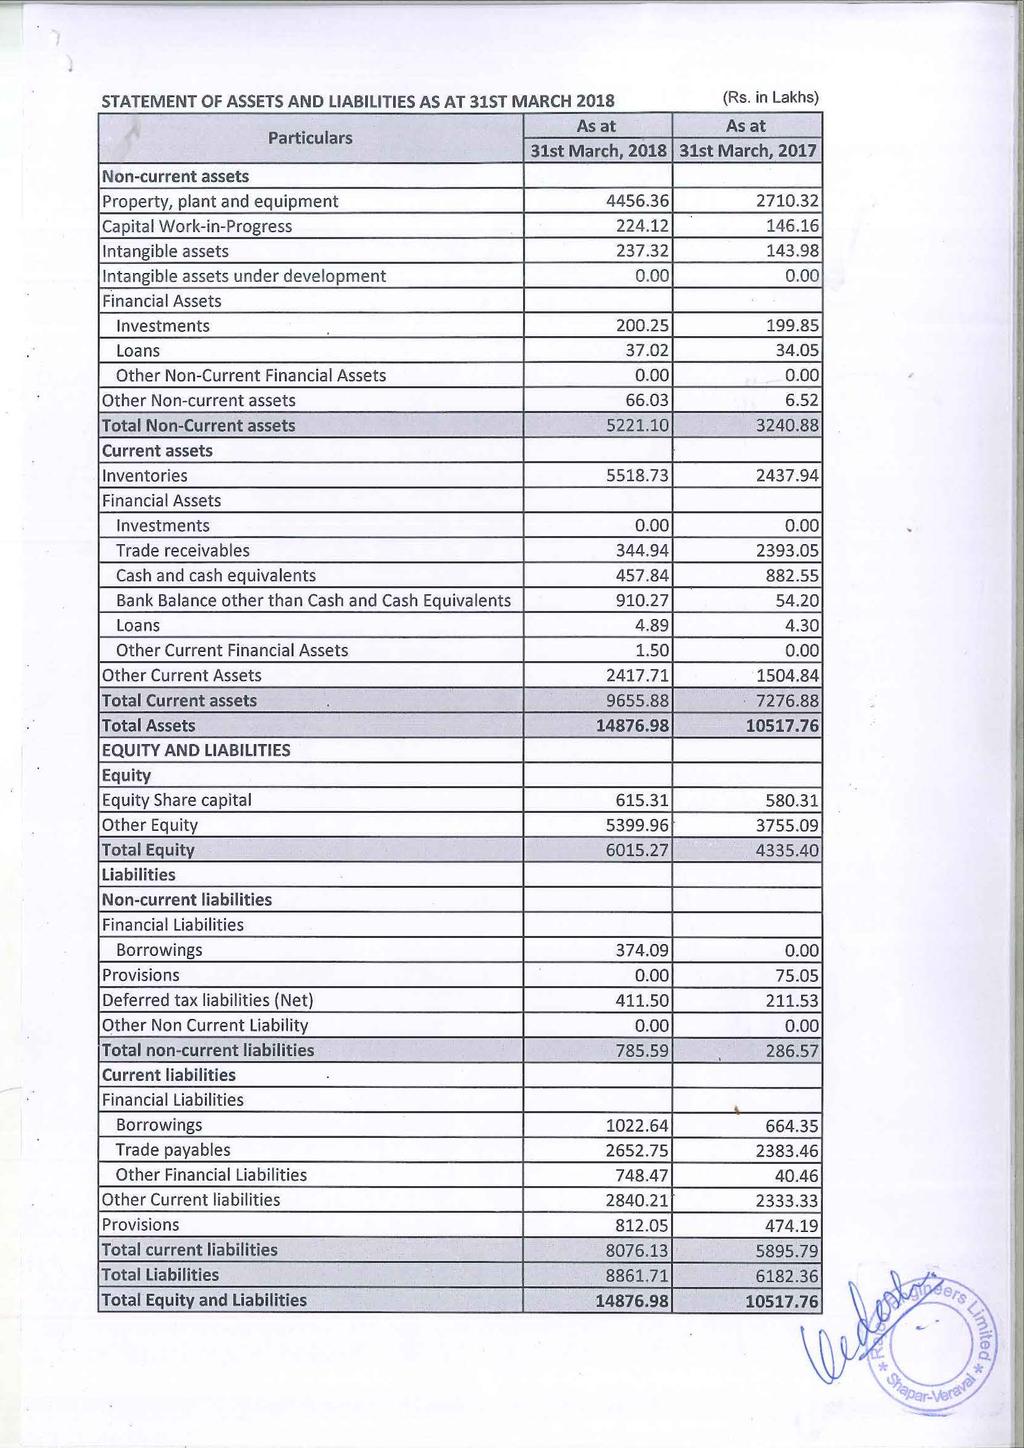 STATEMENT OF ASSETS AND LIABILITIES AS AT 31ST MARCH 2018 Non-current assets As at As at 31st March, 2018 31st March, 2017 Property, plant and equipment 4456.36 2710.32 Capital Work-in-Progress 224.